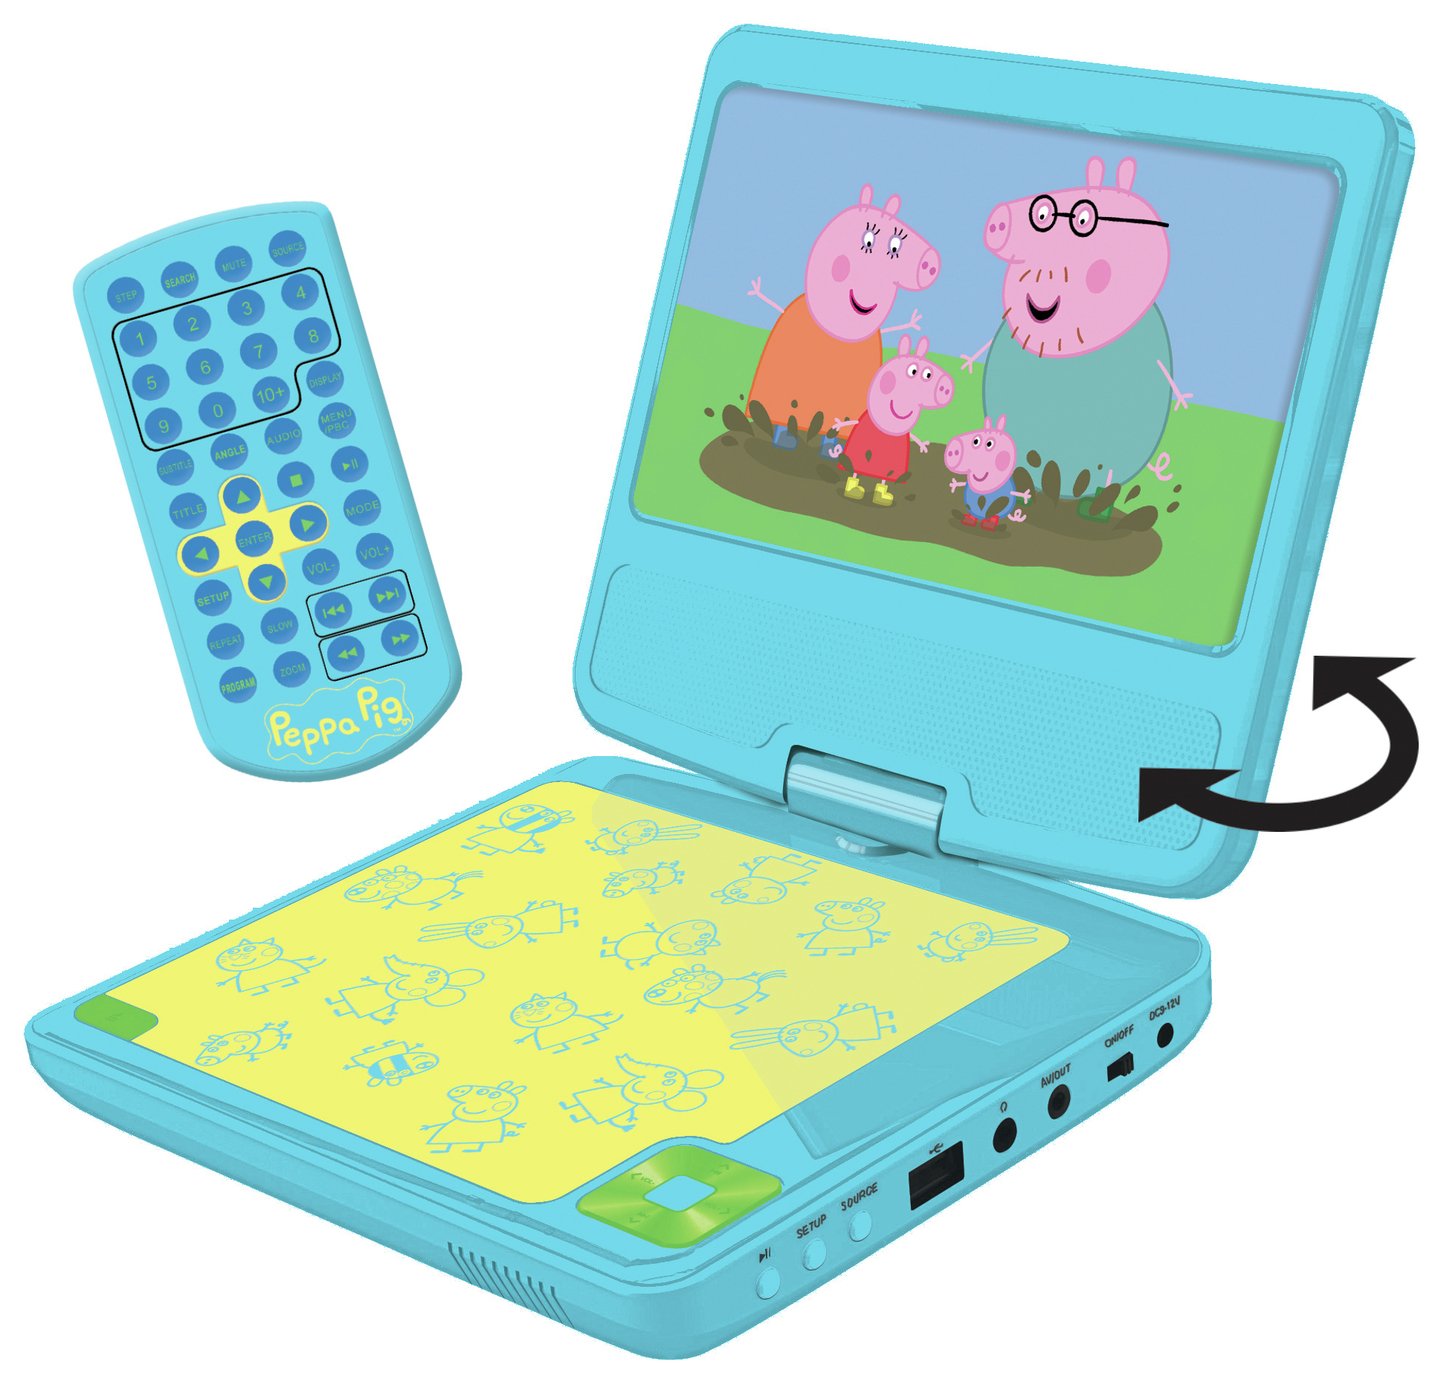 Peppa Pig 7 Inch Portable In review